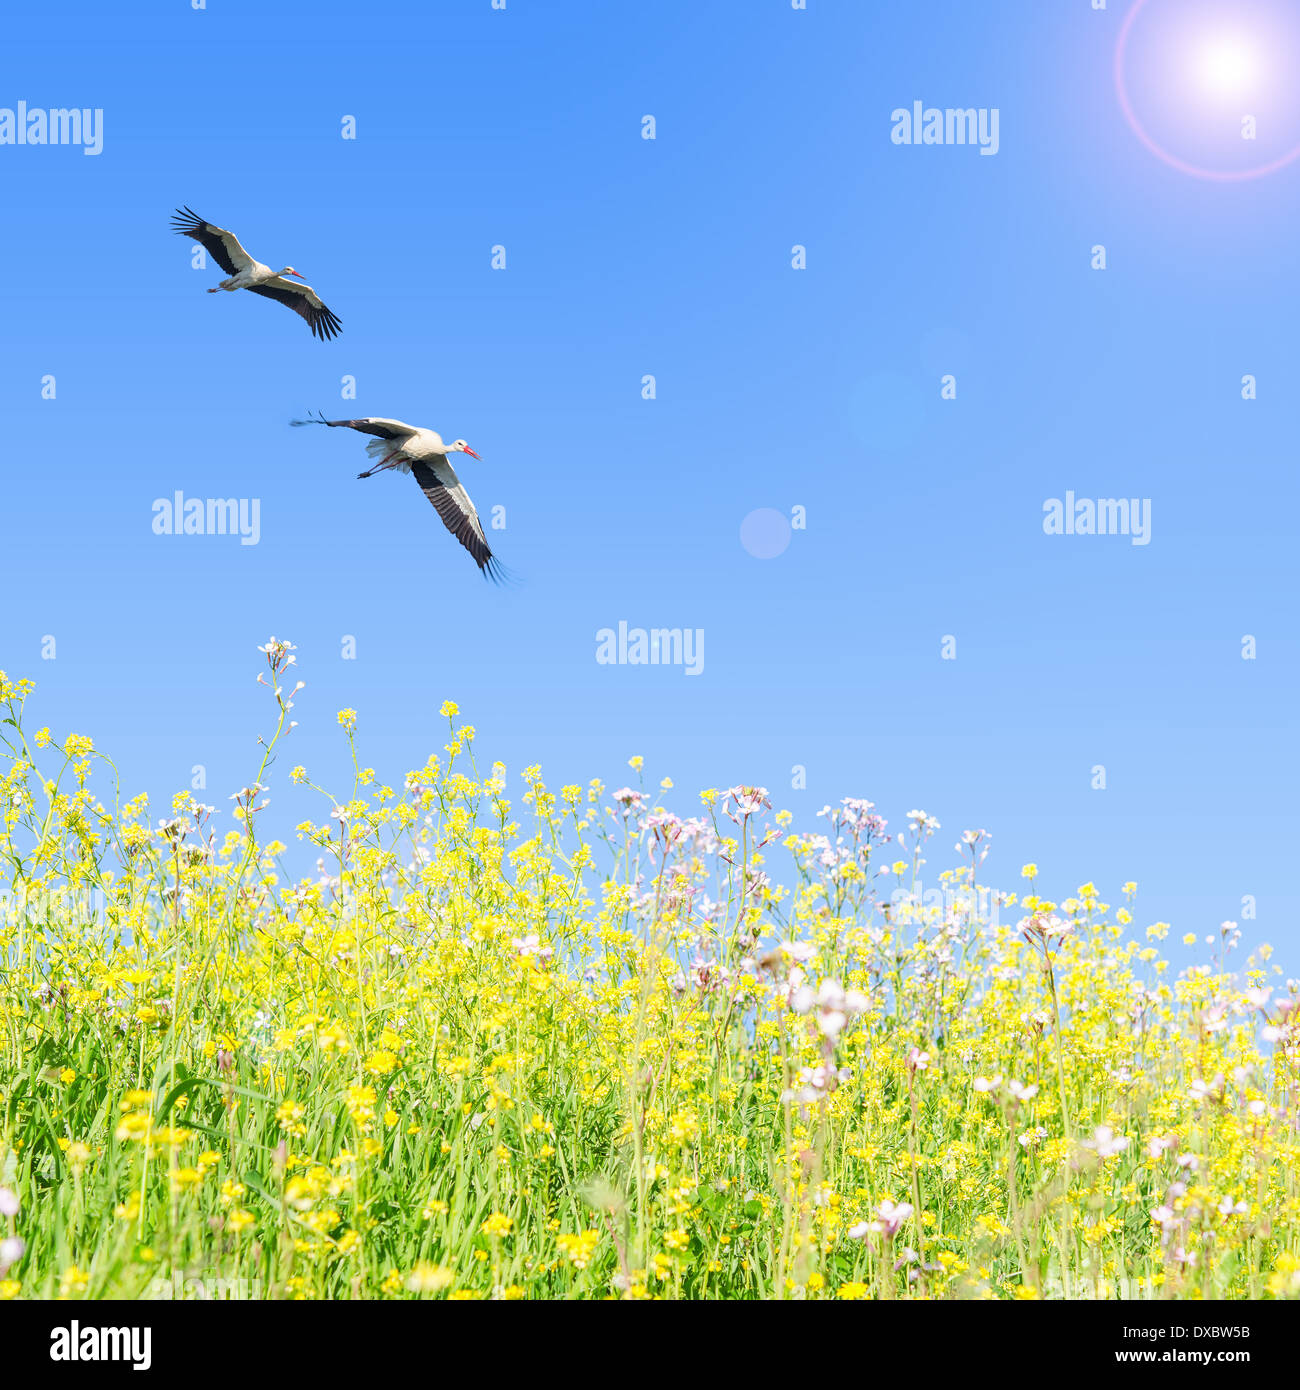 White storks couple fly together against clear blue sky over spring flowering herbs Stock Photo